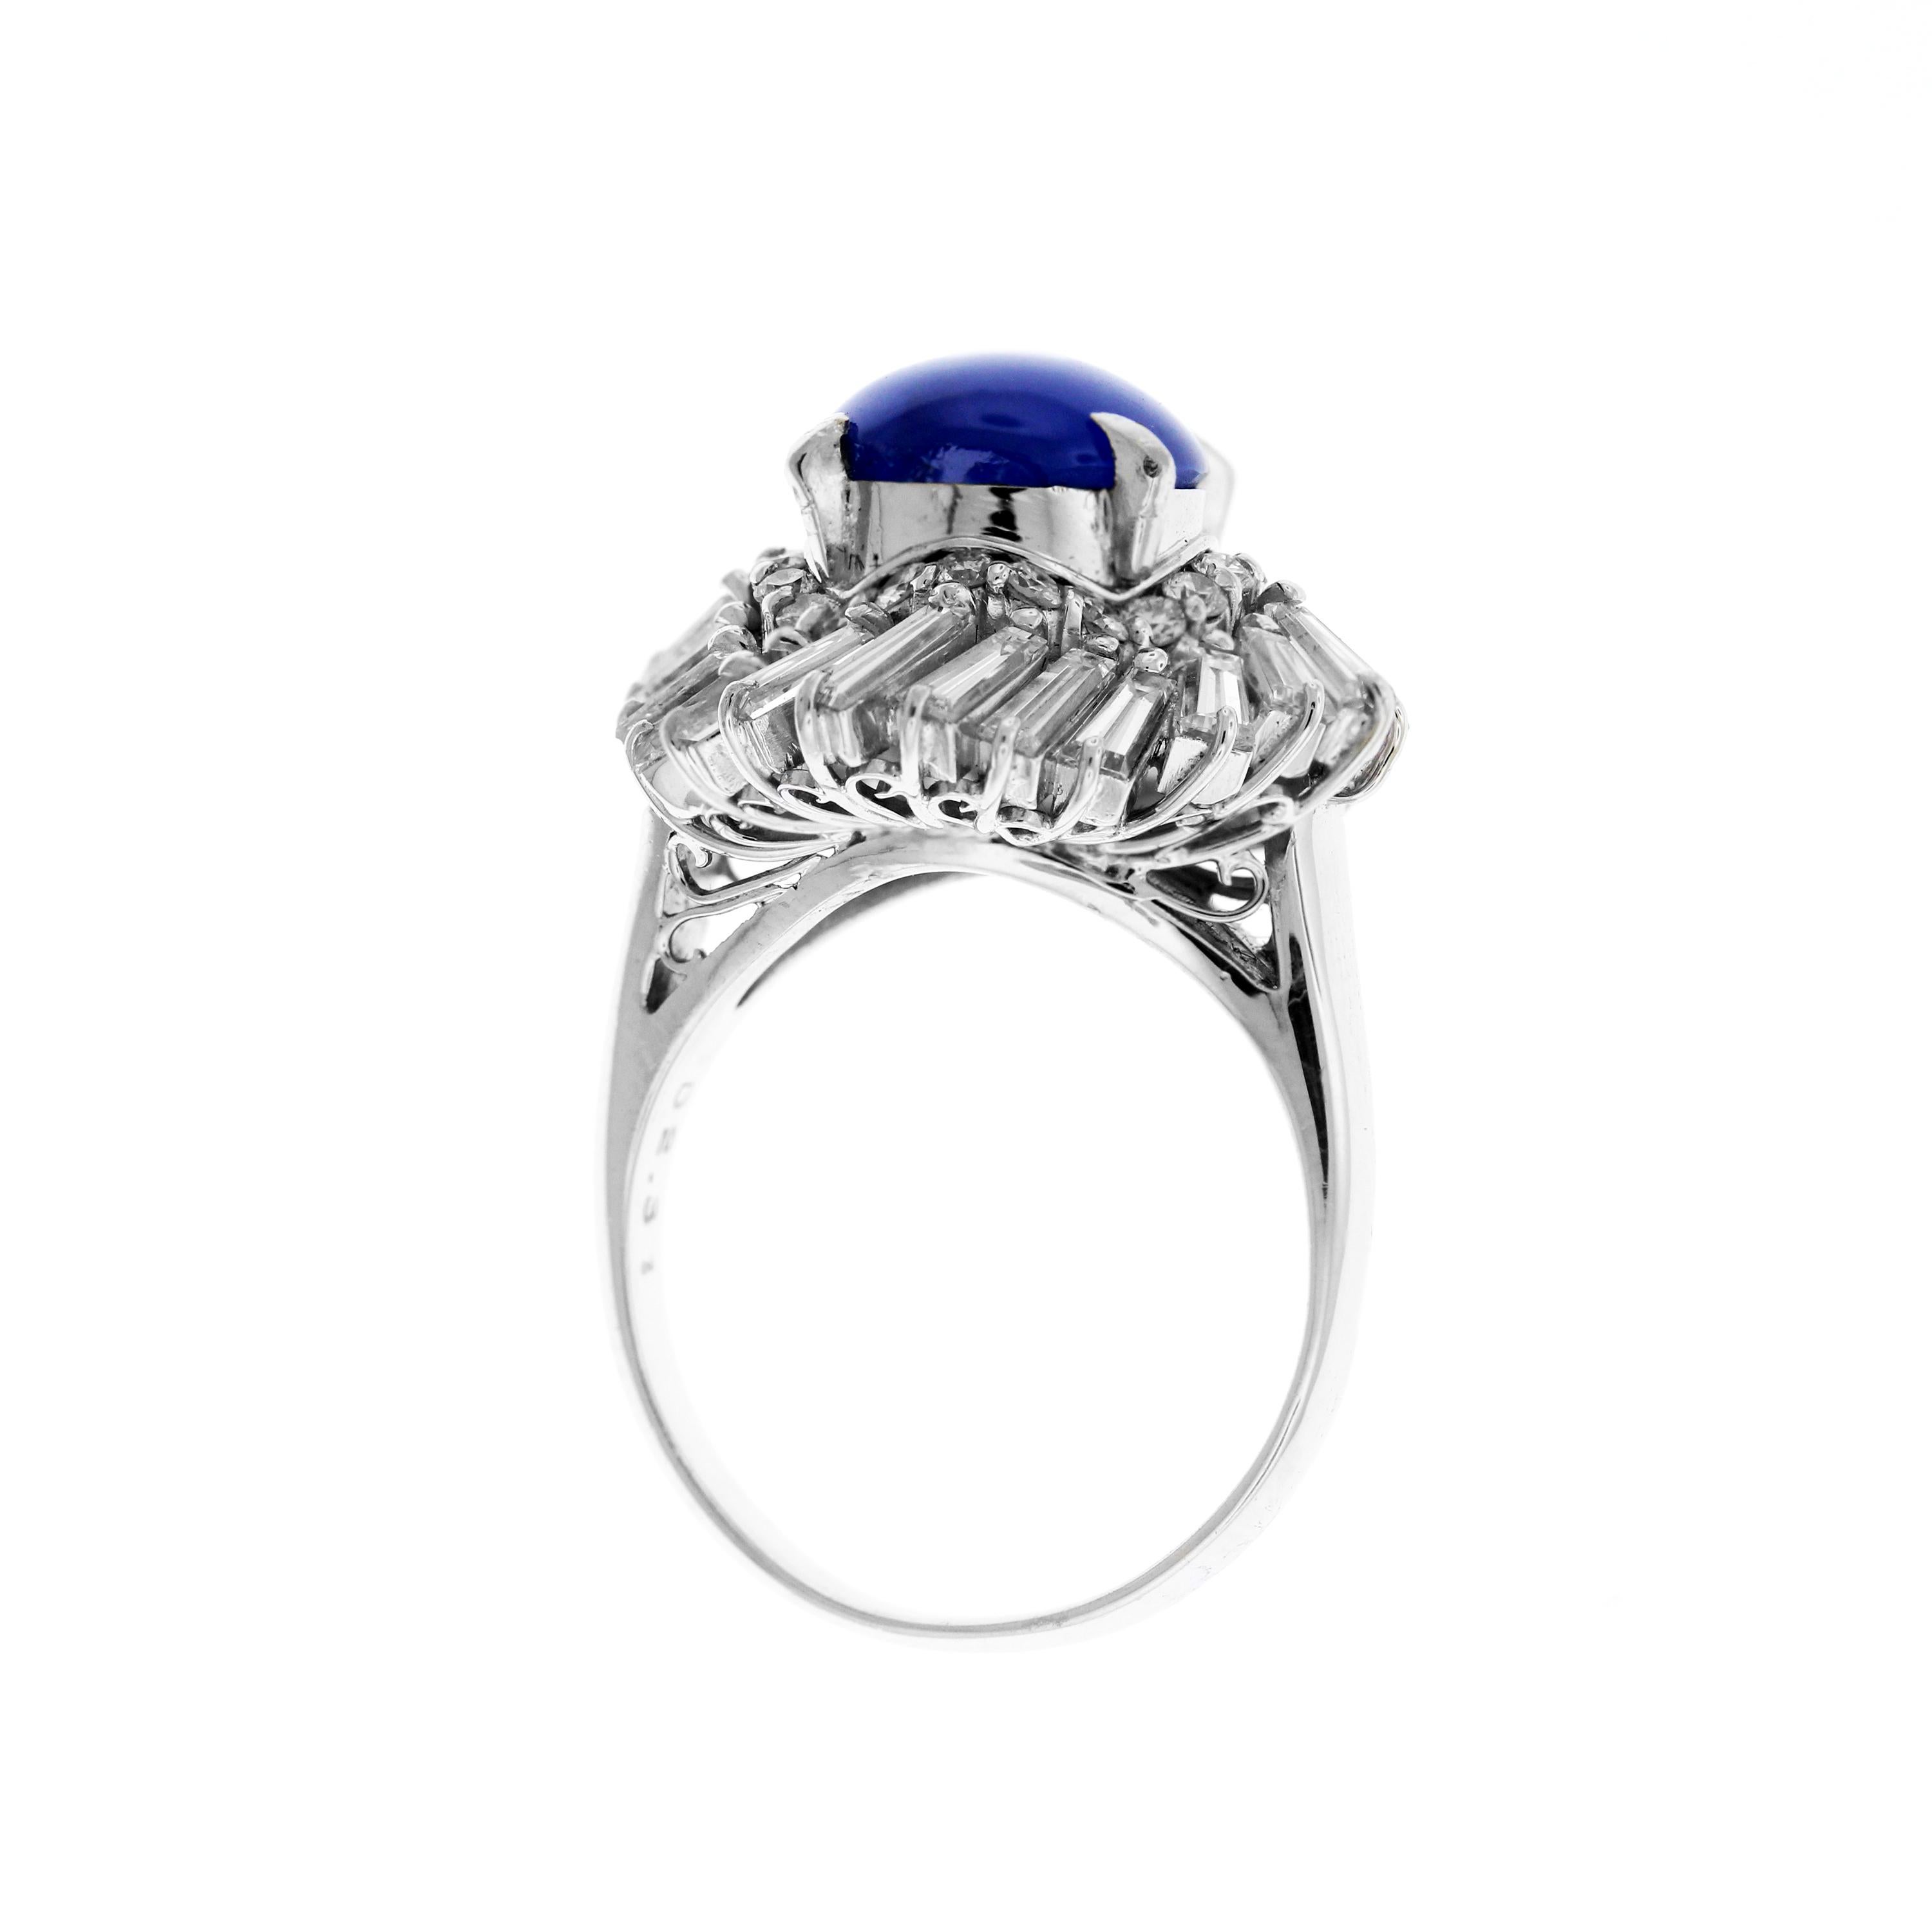 IF YOU ARE REALLY INTERESTED, CONTACT US WITH ANY REASONABLE OFFER. WE WILL TRY OUR BEST TO MAKE YOU HAPPY!

Platinum Cabochon cut Blue Sapphire Center and Spiral Set Baguette Diamond Ring

4.30 carat approximate Cabochon cut Blue Sapphire